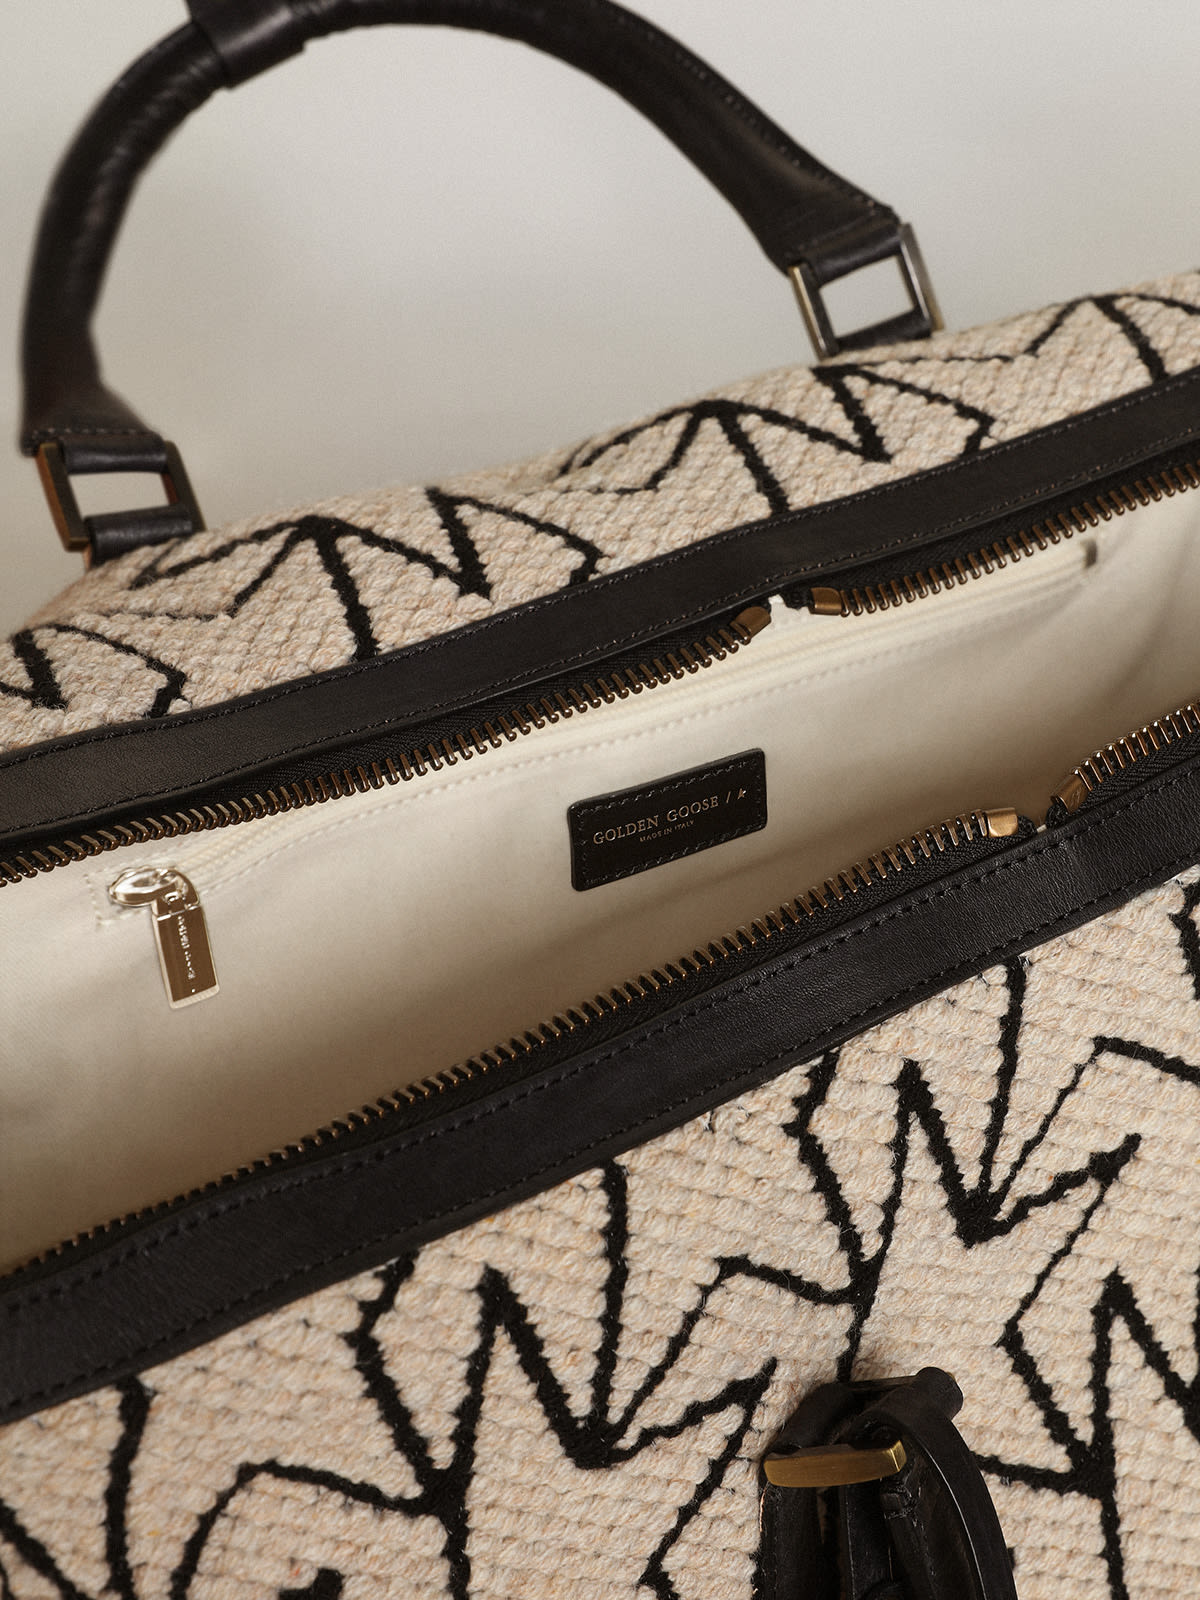 Golden Goose - Duffle bag in milk-white jacquard wool with contrasting black monograms and Golden Goose lettering in 